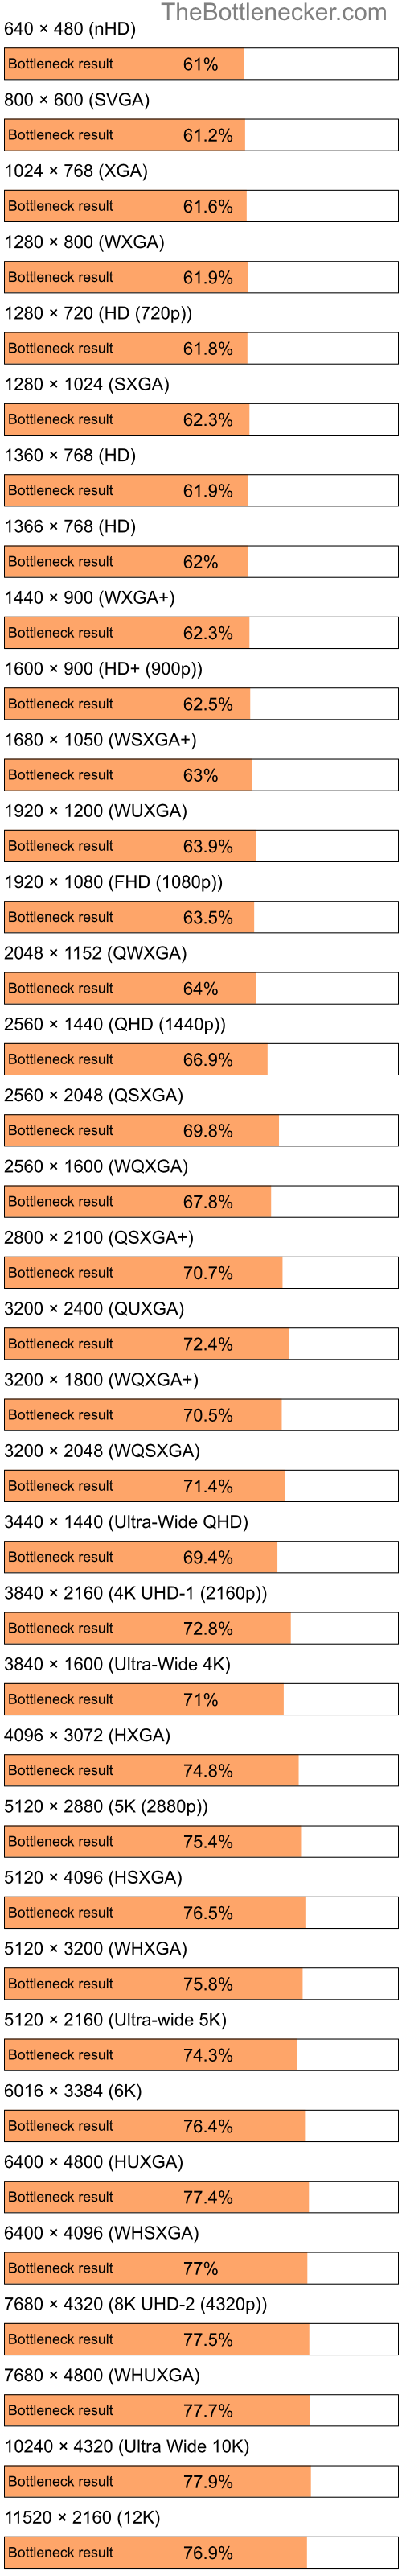 Bottleneck results by resolution for Intel Atom N270 and AMD Mobility Radeon X700 in Processor Intense Tasks